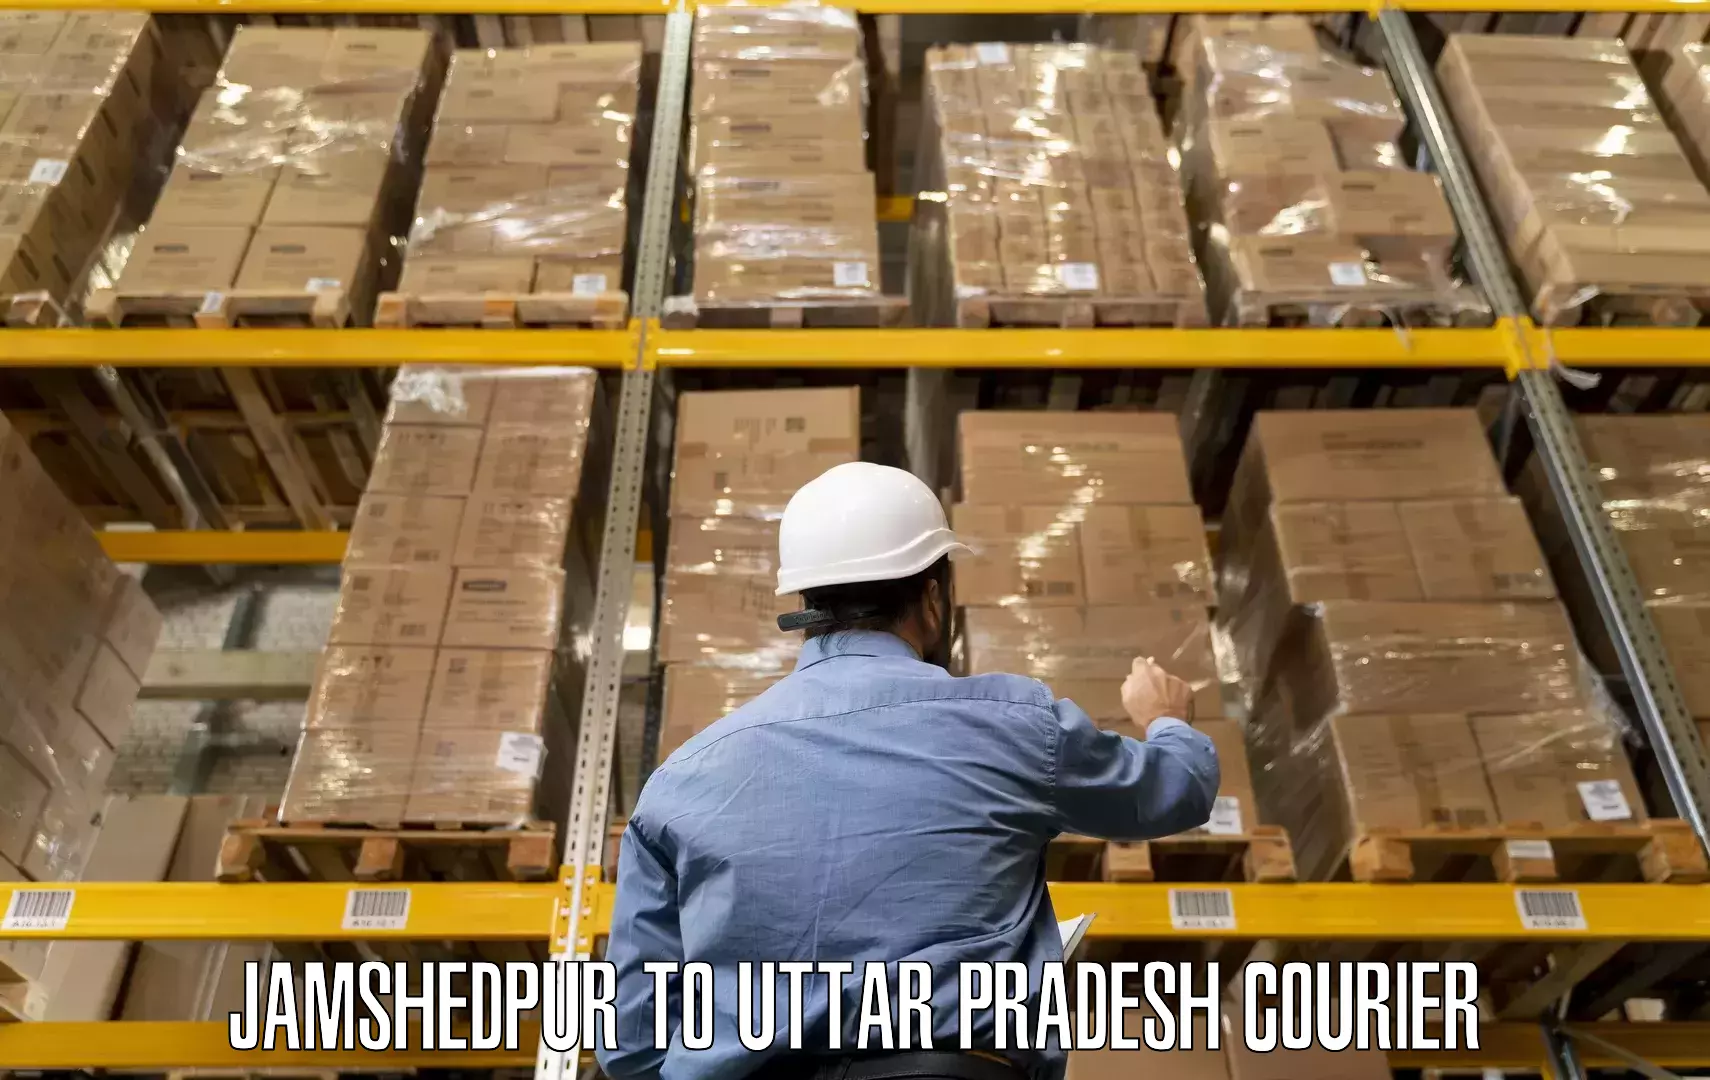 Trusted relocation experts Jamshedpur to Gorakhpur